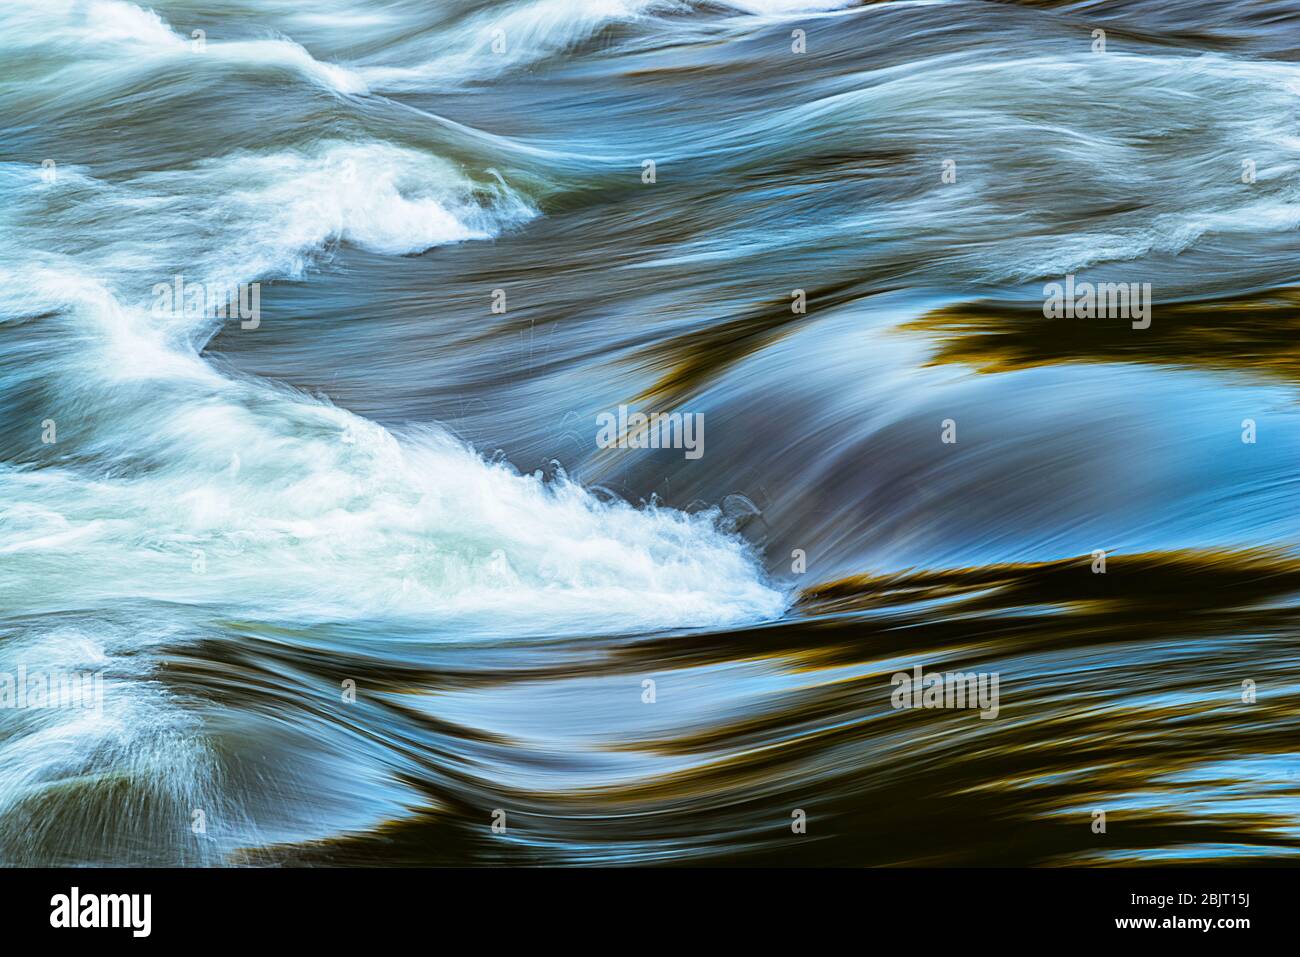 Blues, golds and greens reflect on the surface of the New River, creating the appearance of a molten mixture fusing together the substances of nature Stock Photo